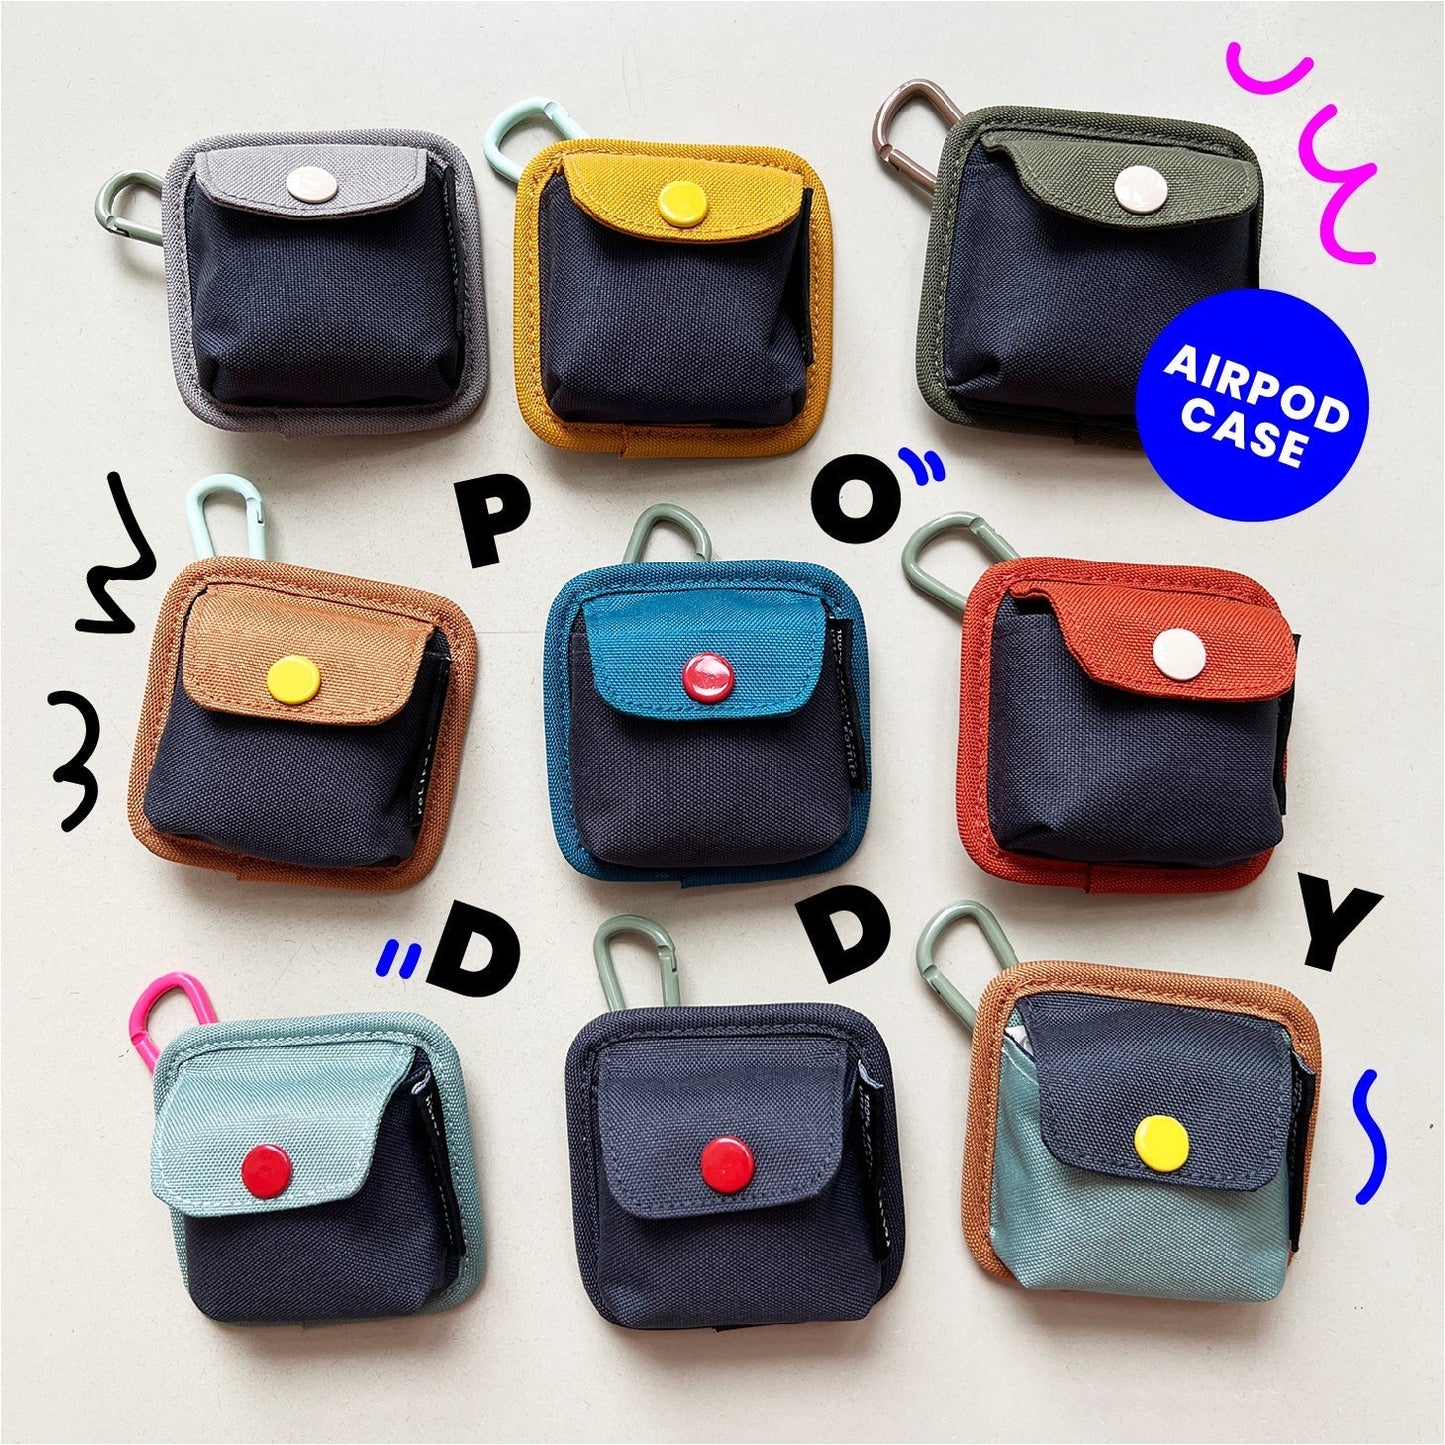 Poddy relife wild airpod pouch